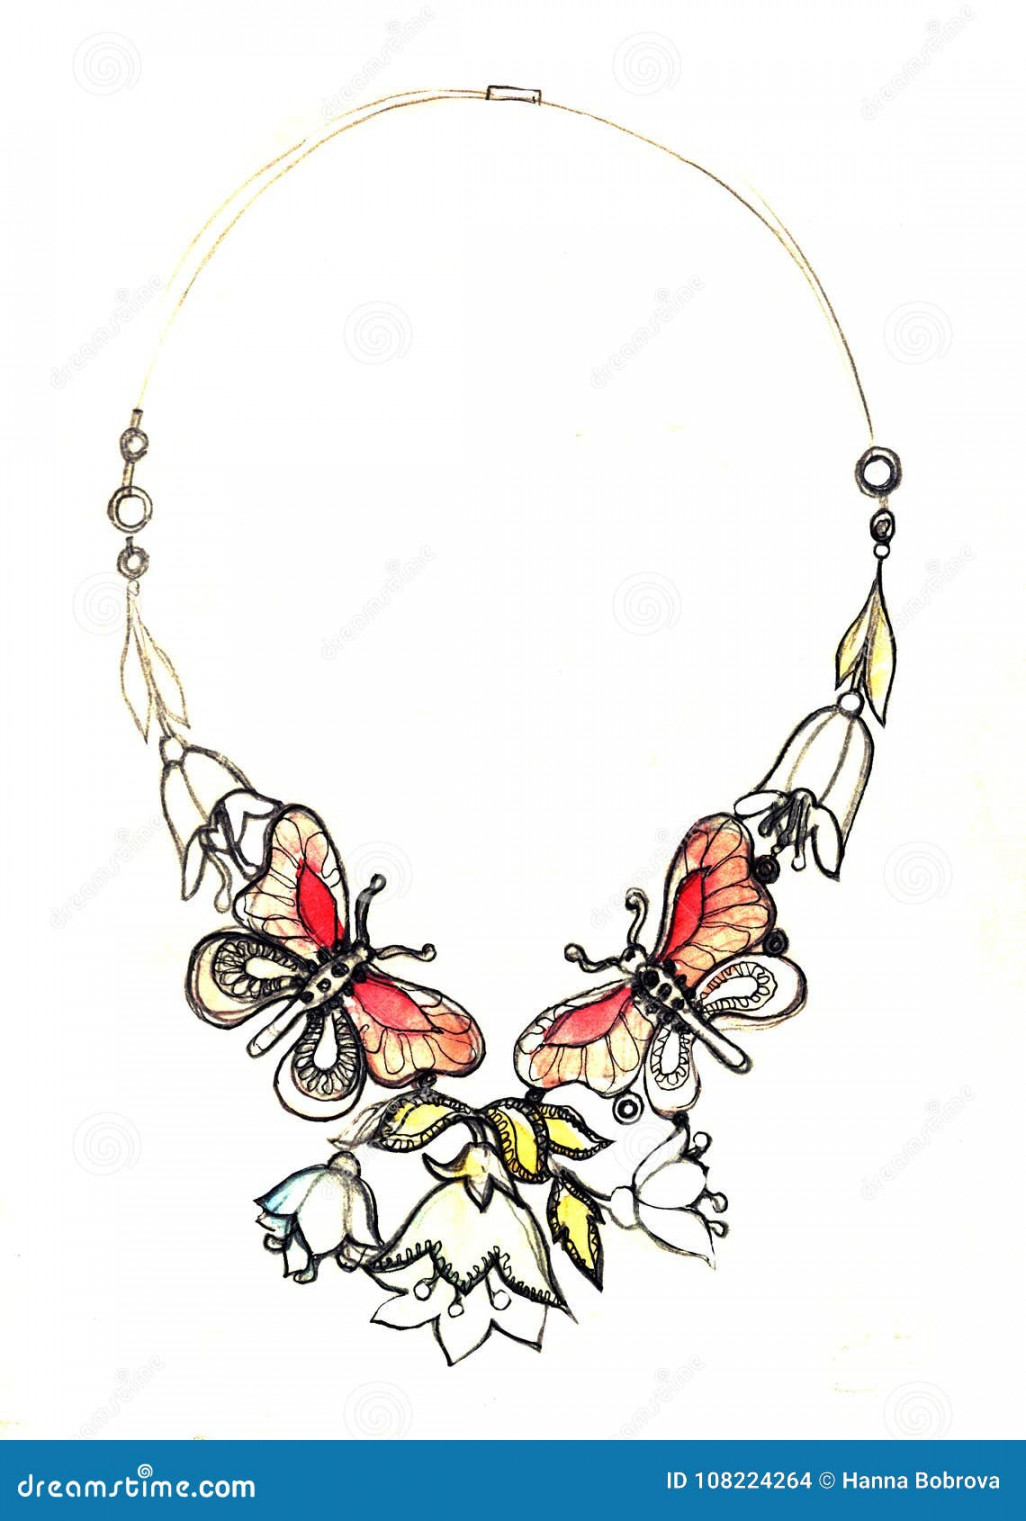 Watercolor Jewelry Illustration, Necklace Fashion Sketch, Jewelry